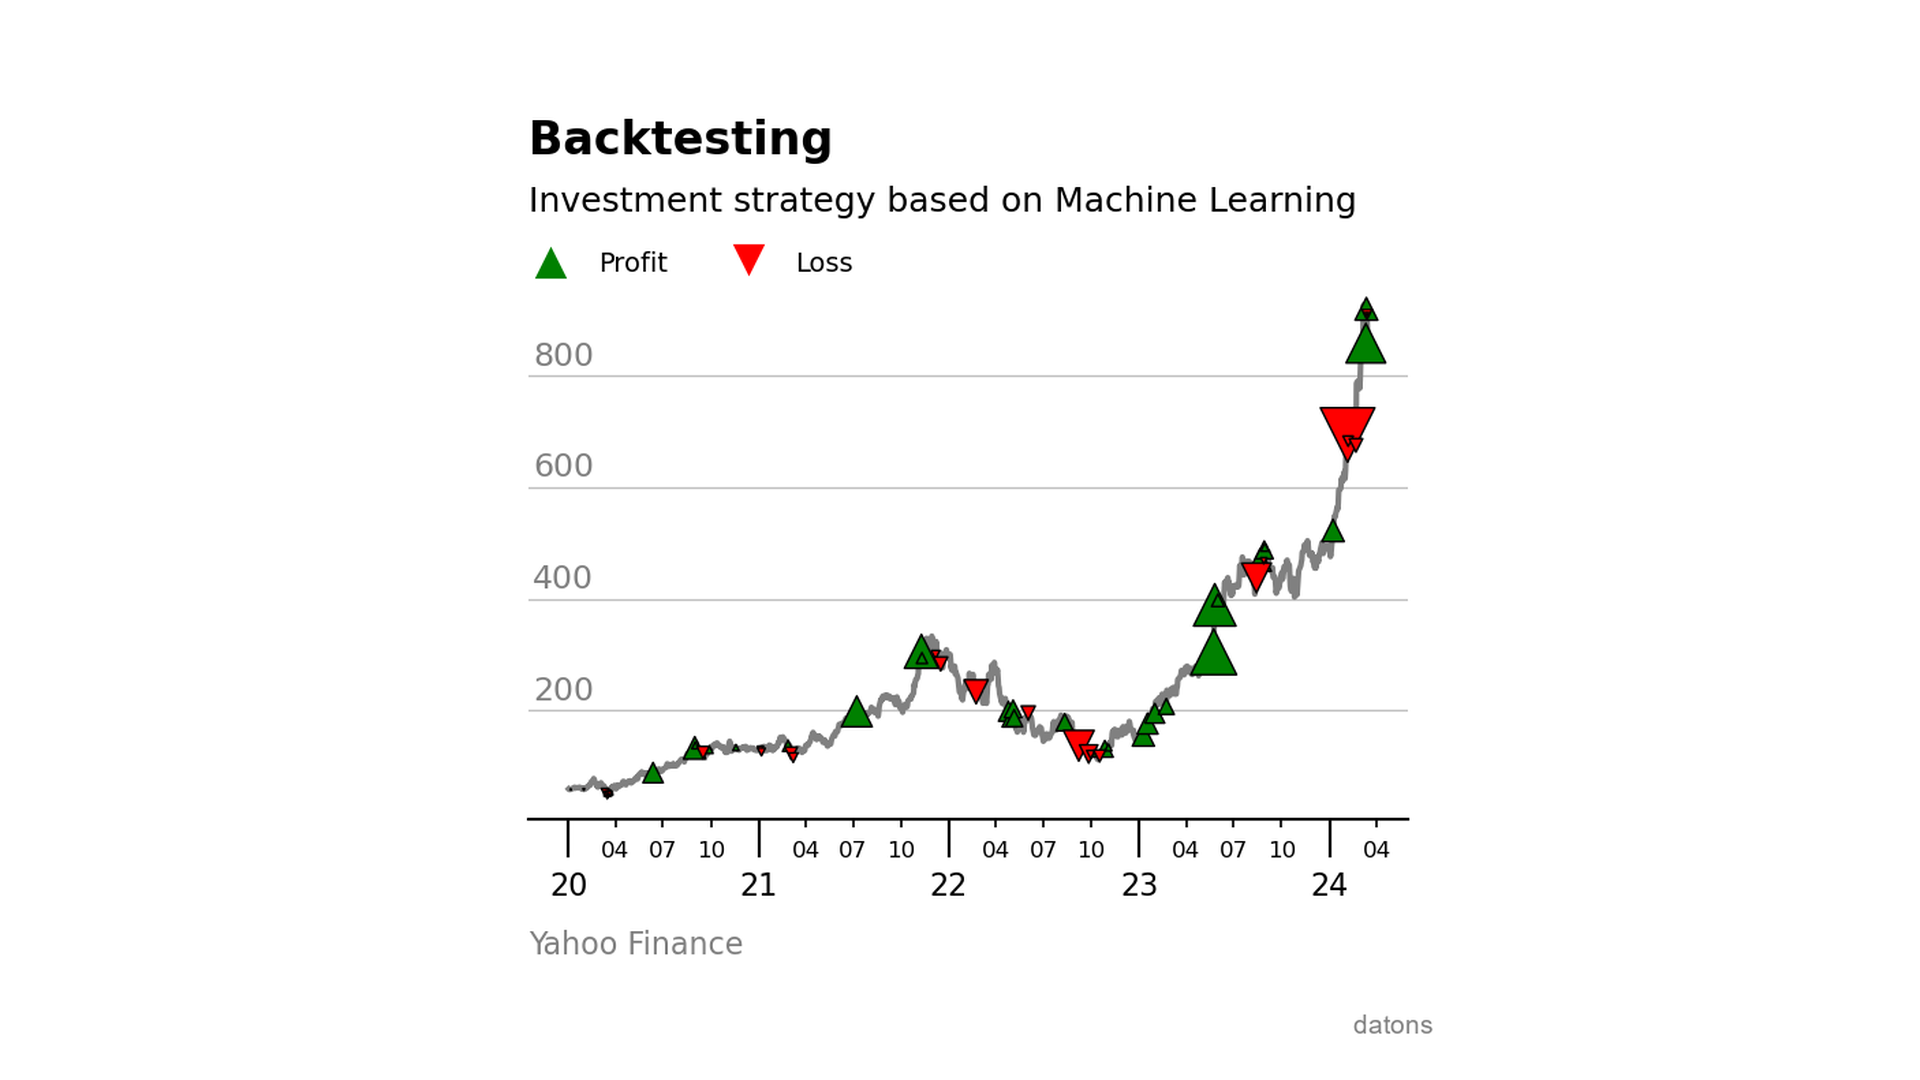 Illustrative scheme of applying a Machine Learning model in an investment strategy, showing the decision-making process based on price predictions.